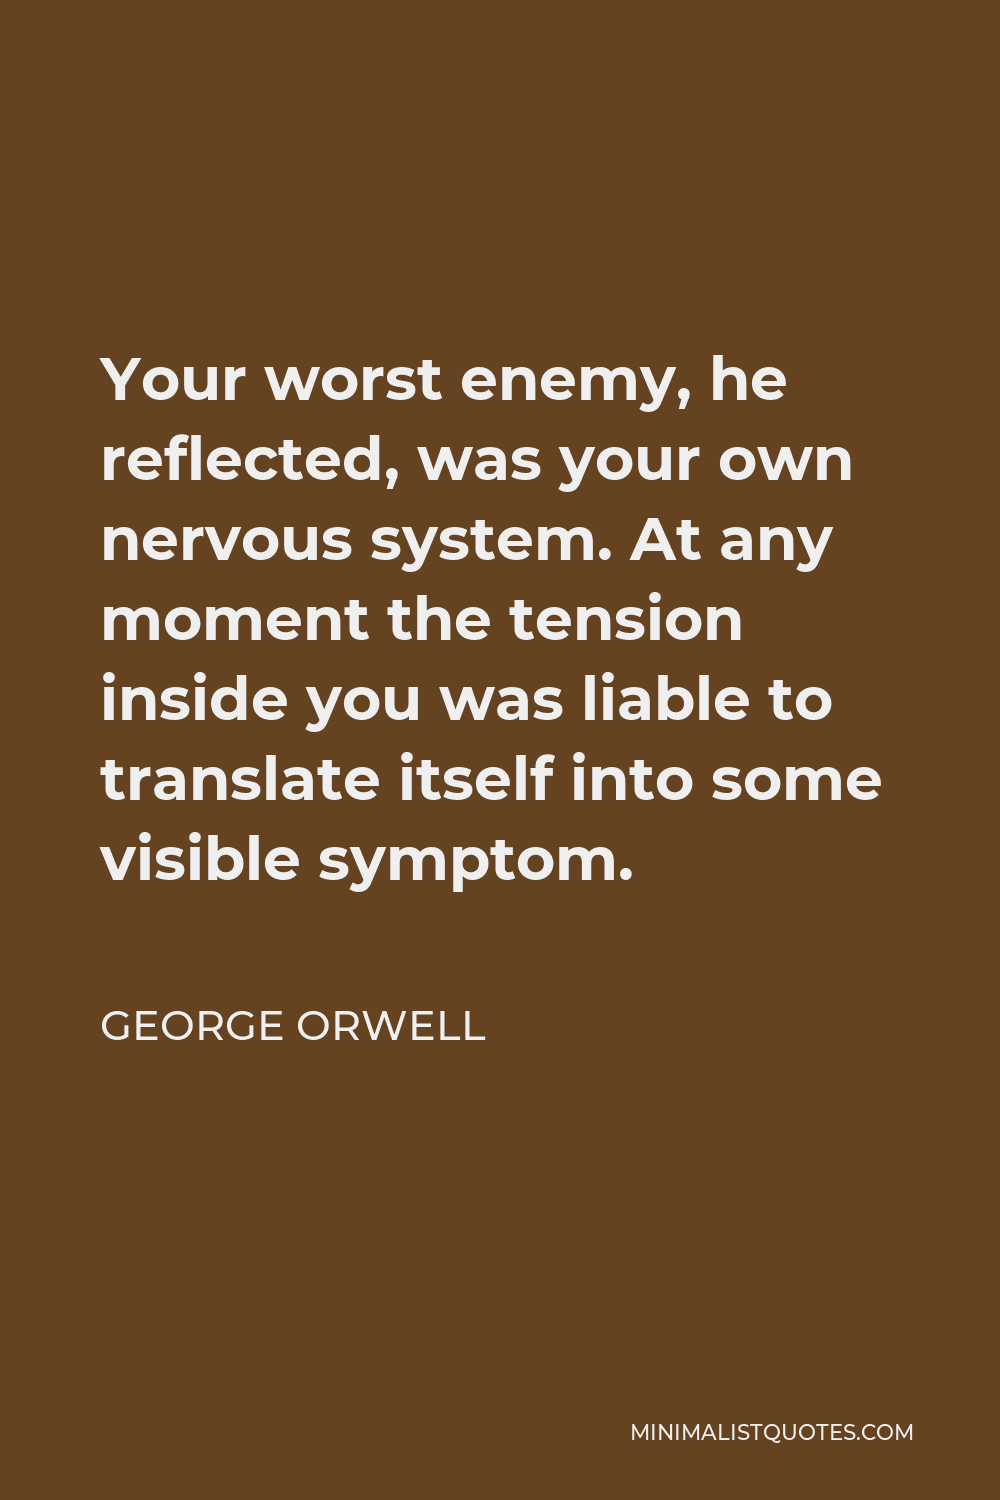 George Orwell Quote - Your worst enemy, he reflected, was your own nervous system. At any moment the tension inside you was liable to translate itself into some visible symptom.